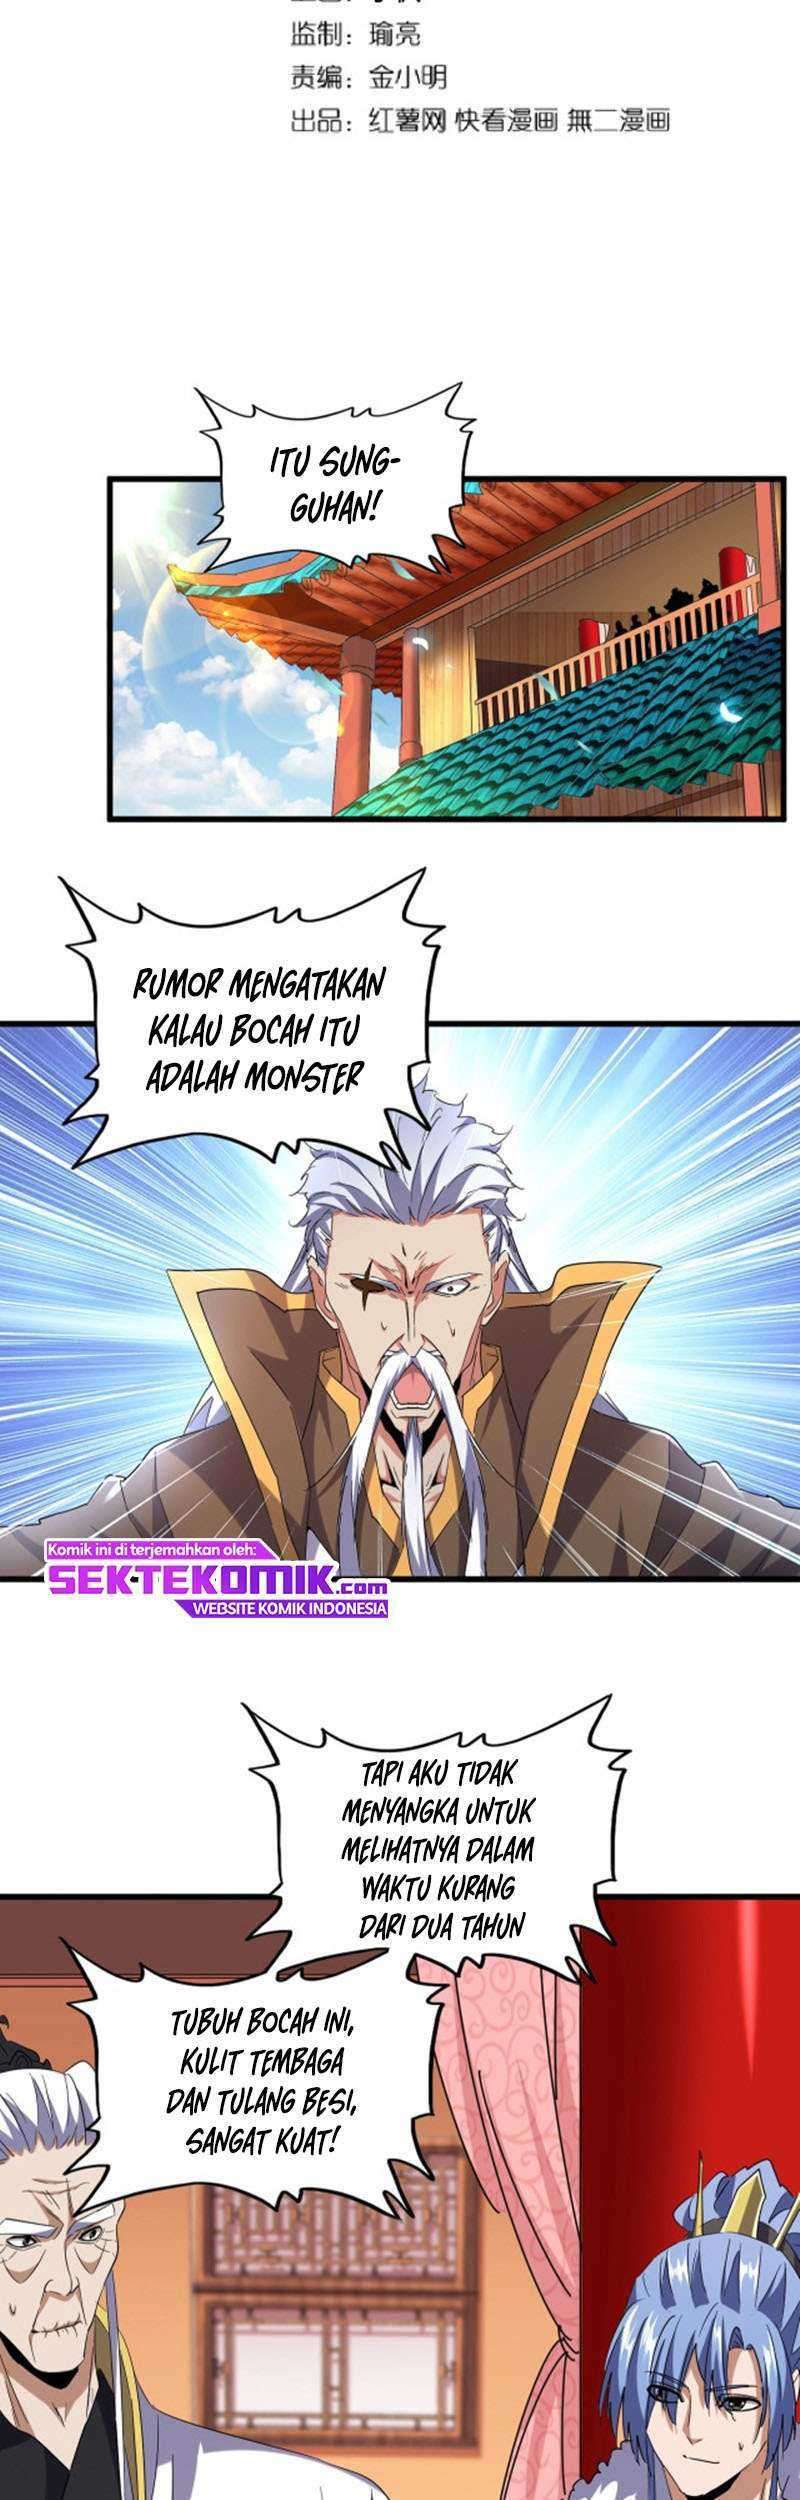 Magic Emperor Chapter 188 Image 3